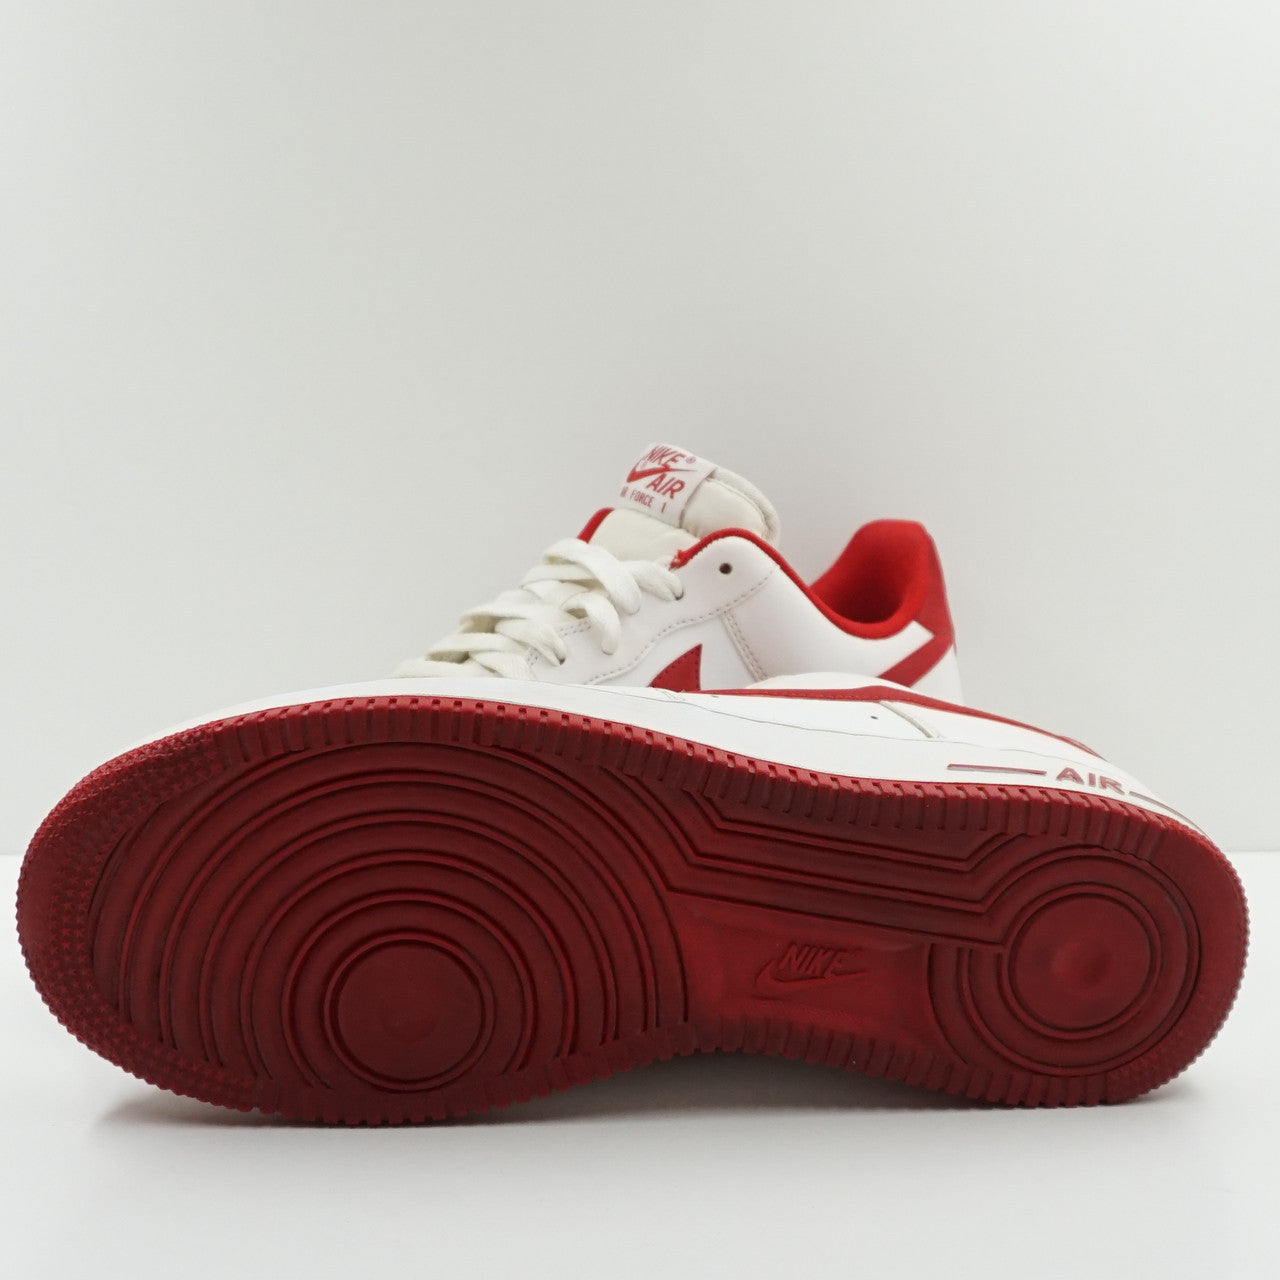 Nike Air Force 1 Low Gym Red Swoosh